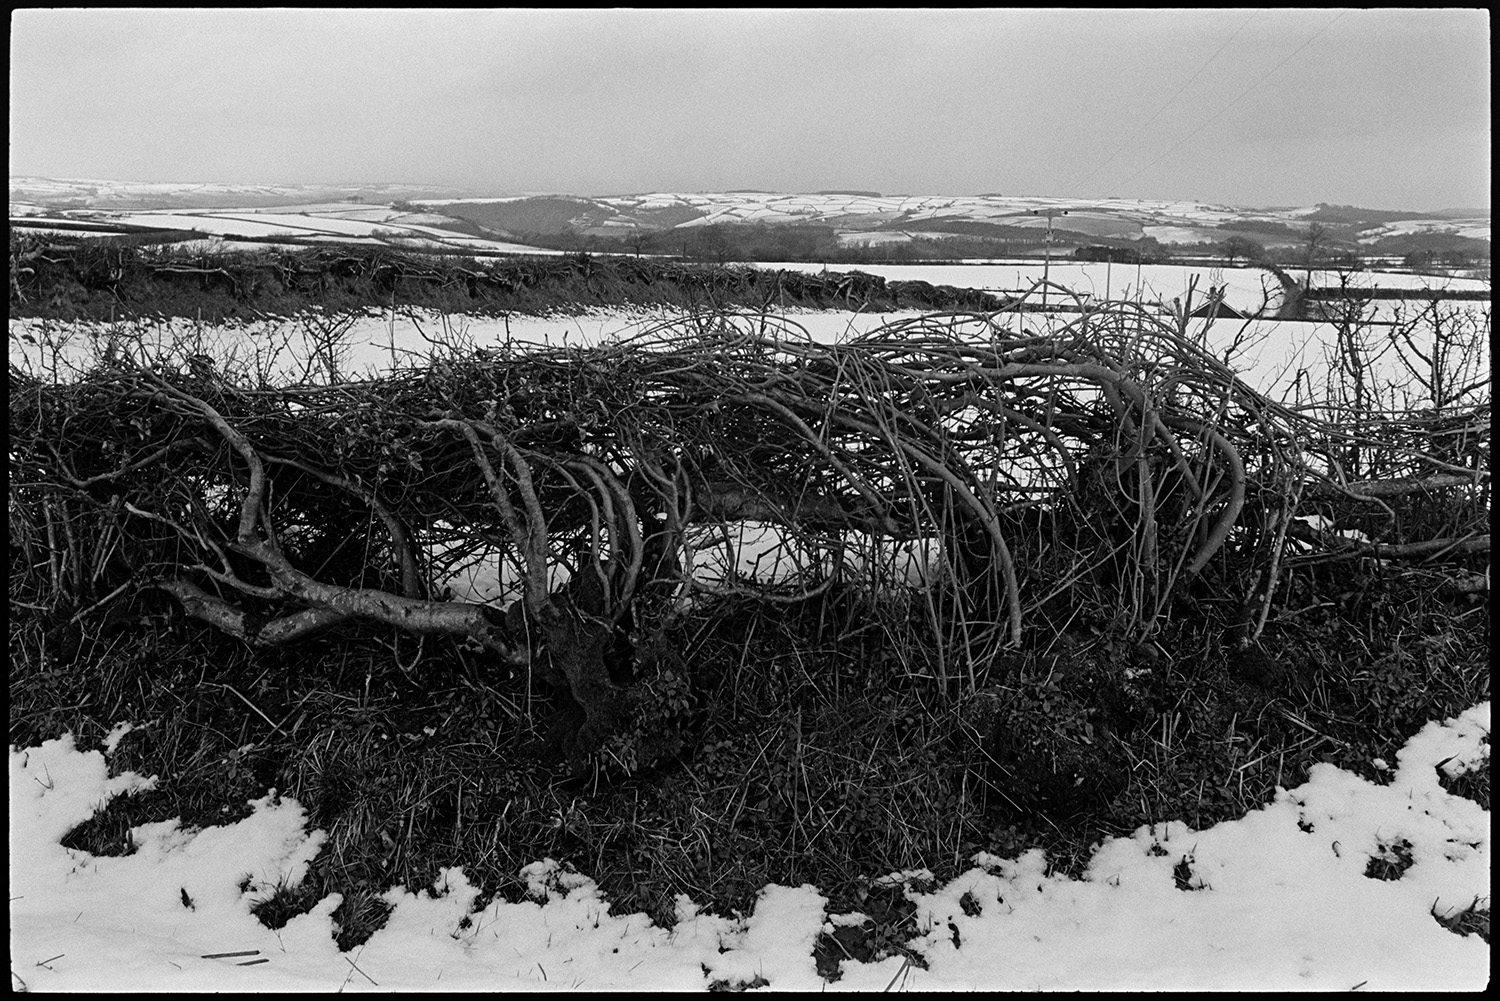 Snow, hedge laid like basket against snowy fields. 
[A laid hedge surrounded by a landscape of snow covered fields near Knowstone, Exmoor.]